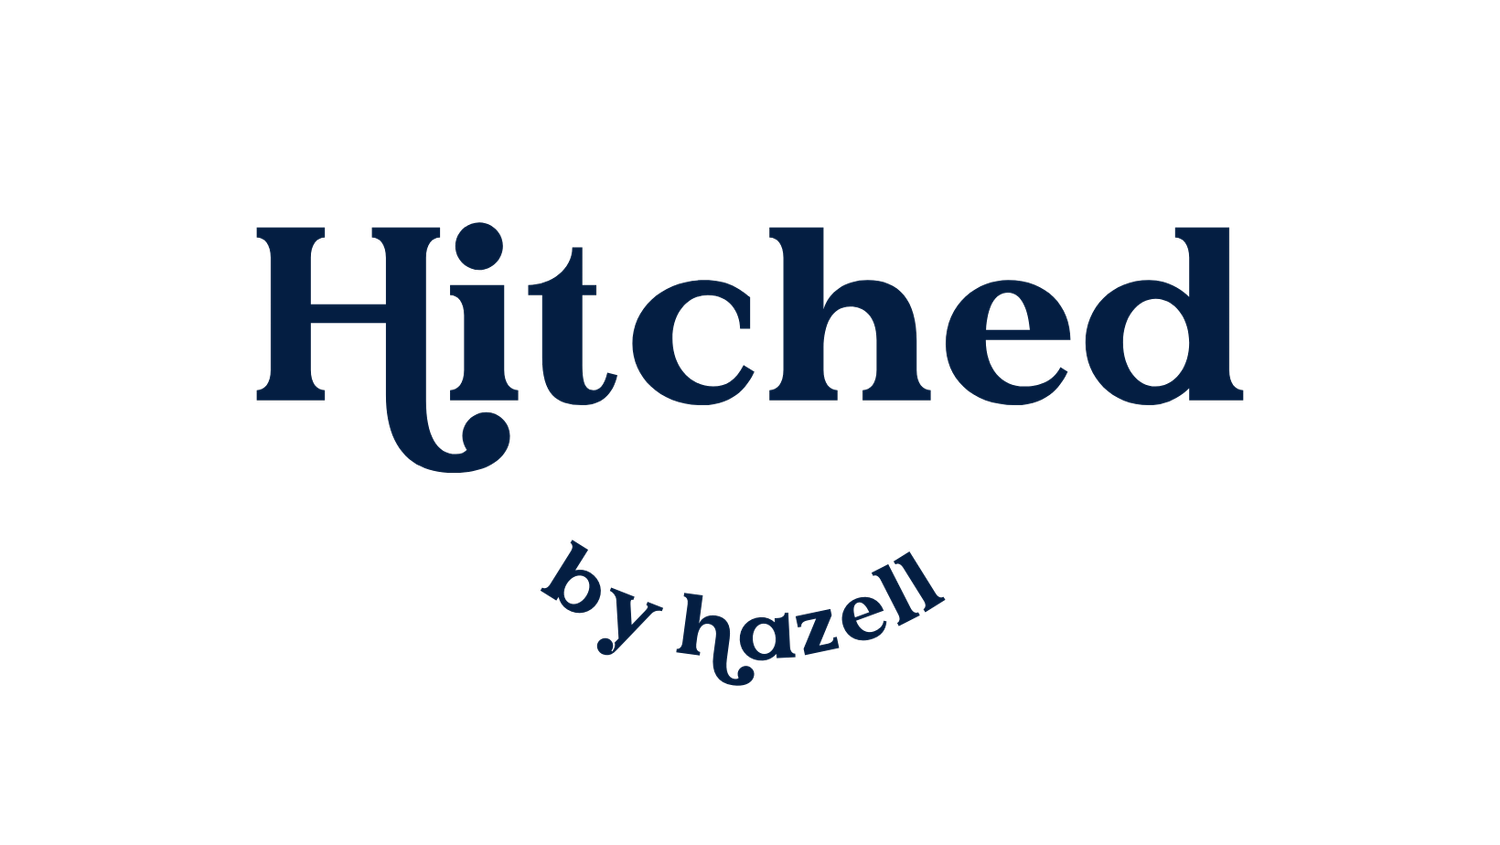 Hitched by hazell